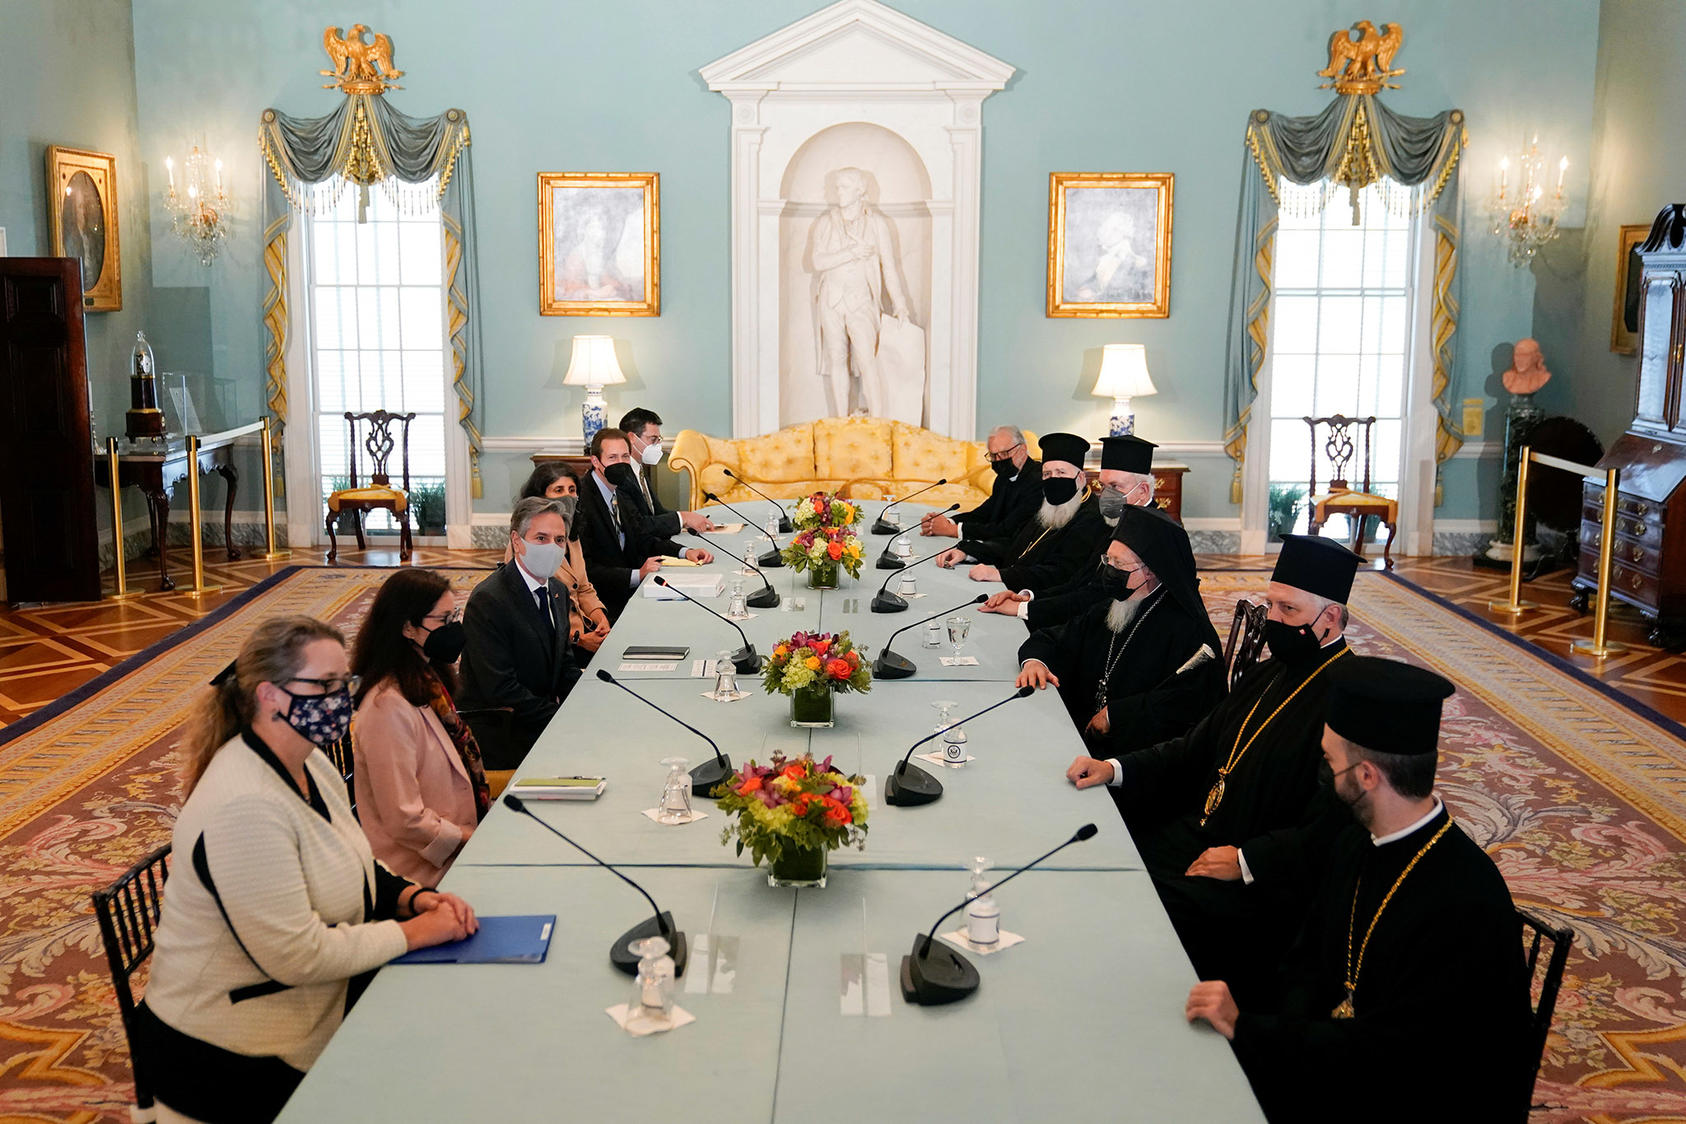 US Secretary of State Antony Blinken speaks at a meeting with Ecumenical Patriarch Bartholomew I of Constantinople on October 25, 2021. (Photo by Patrick Semansky/Reuters)